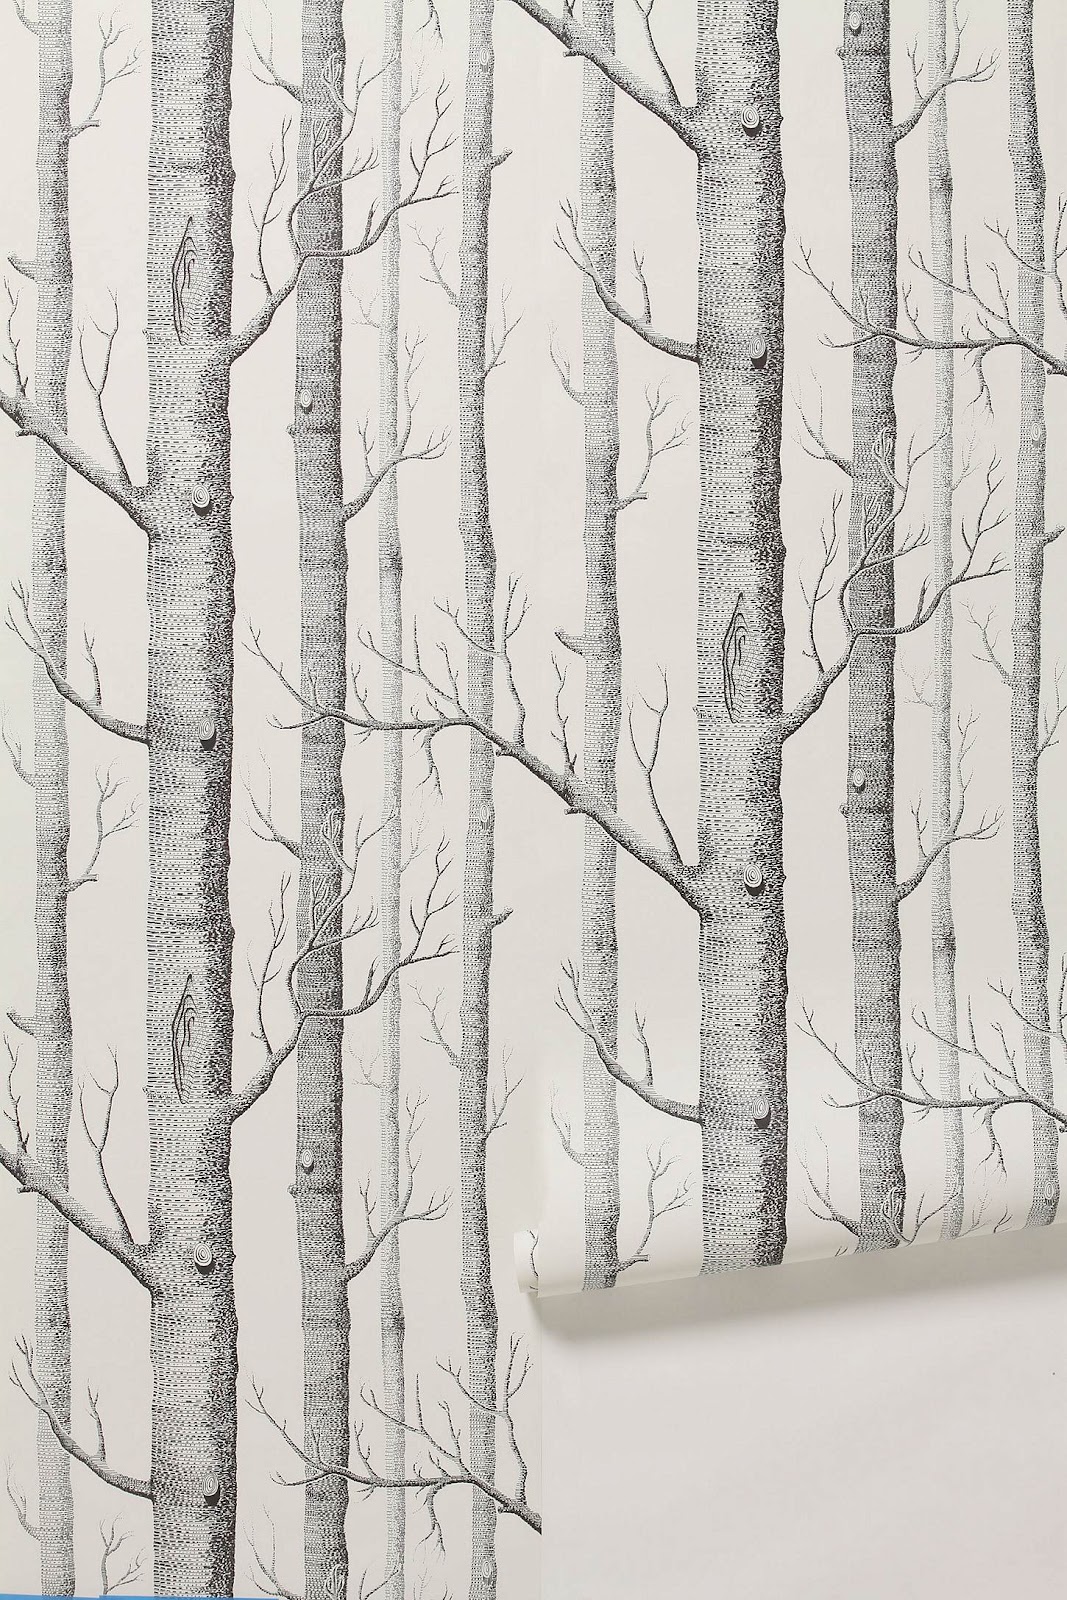 Anthropologie Wood Trees Forest Wallpaper Black And White Gray Modern